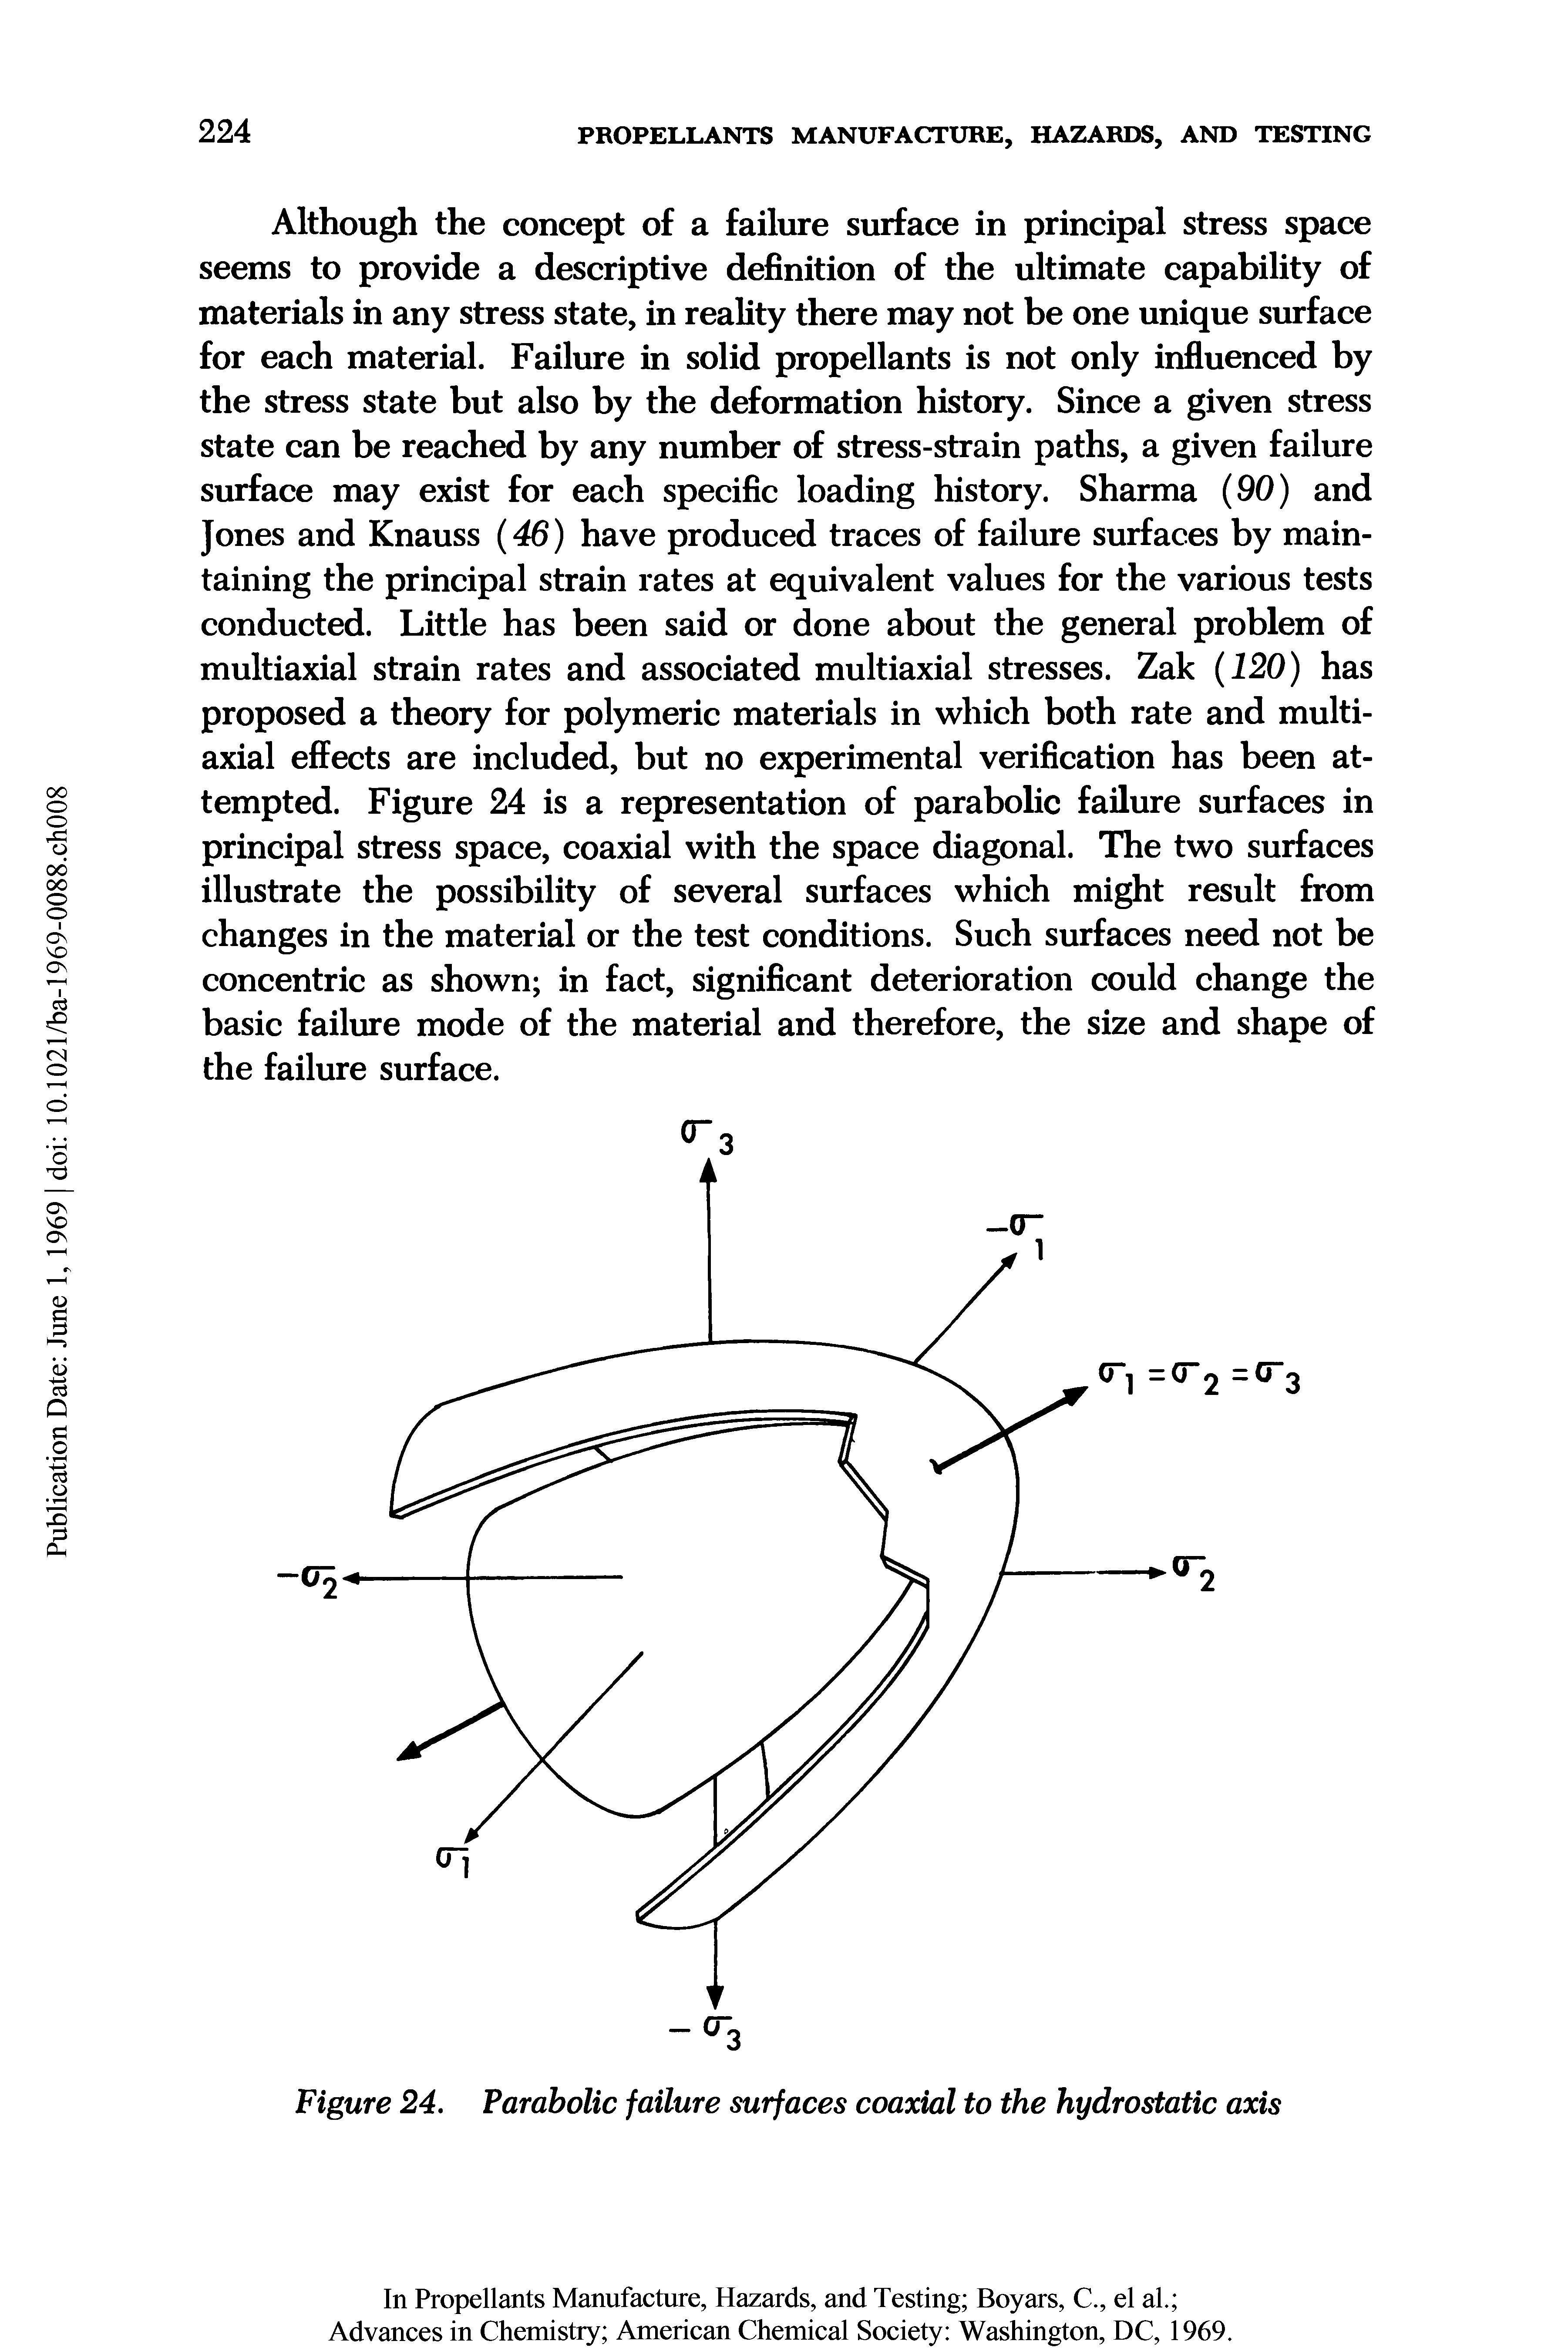 Figure 24. Parabolic failure surfaces coaxial to the hydrostatic axis...